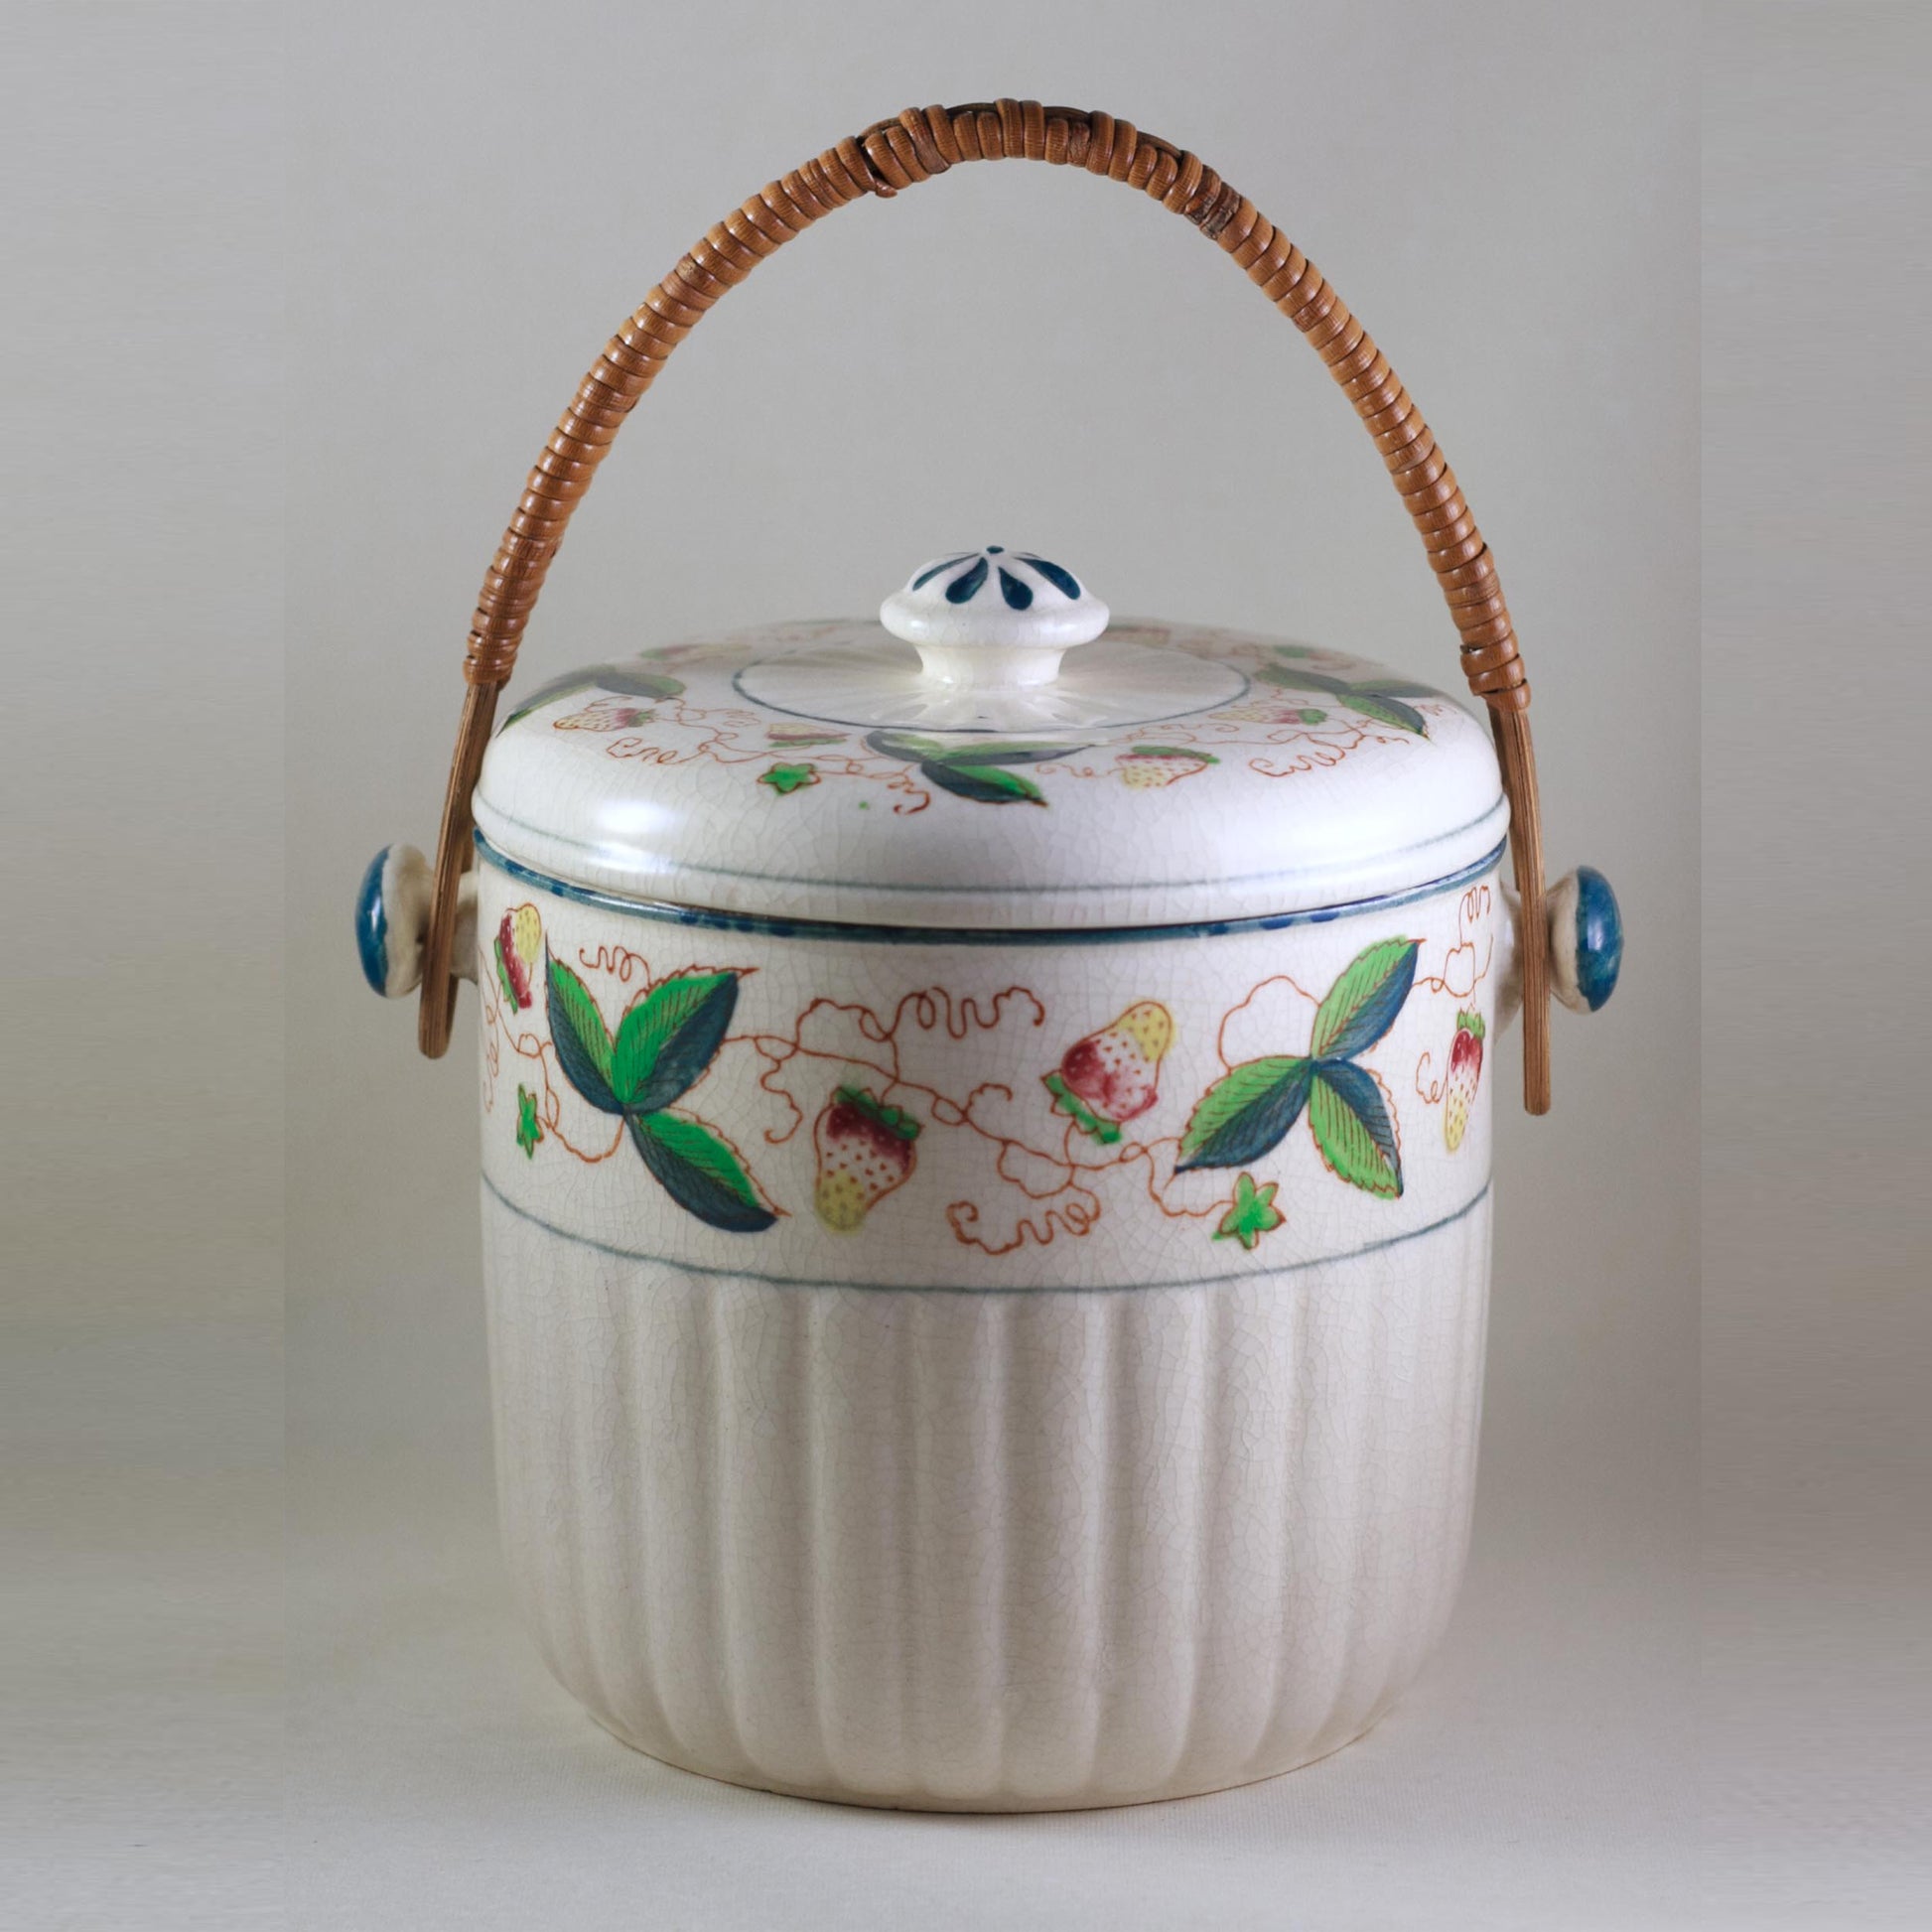 MADE IN JAPAN BISCUIT JAR with Rattan Handle Circa 1940s